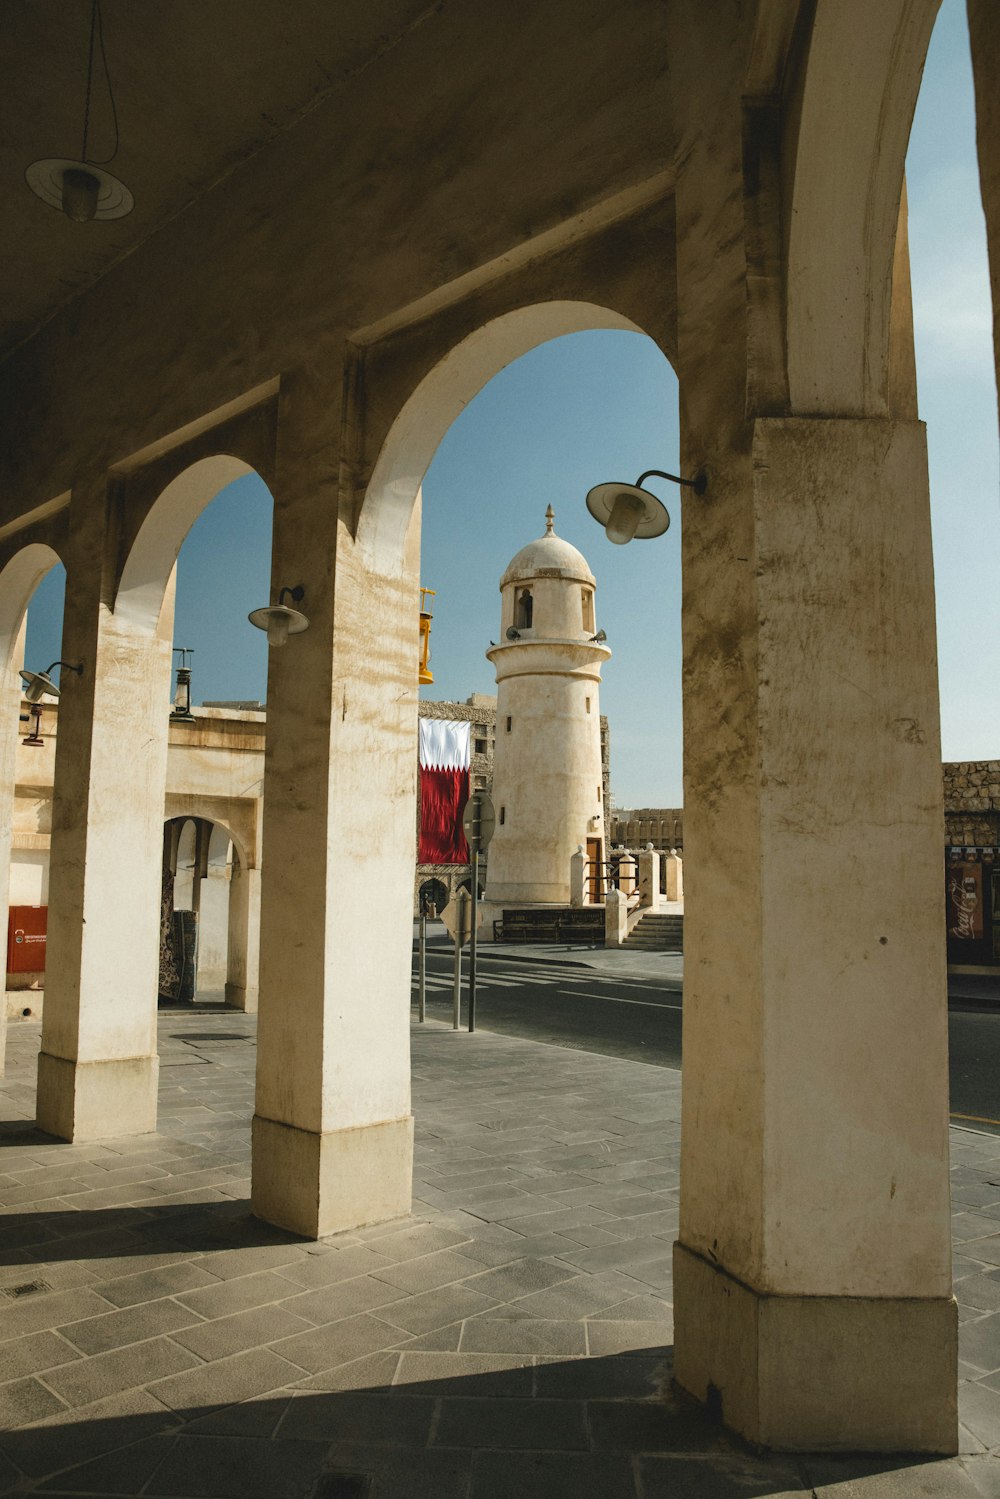 a building with arches and a clock tower in the background